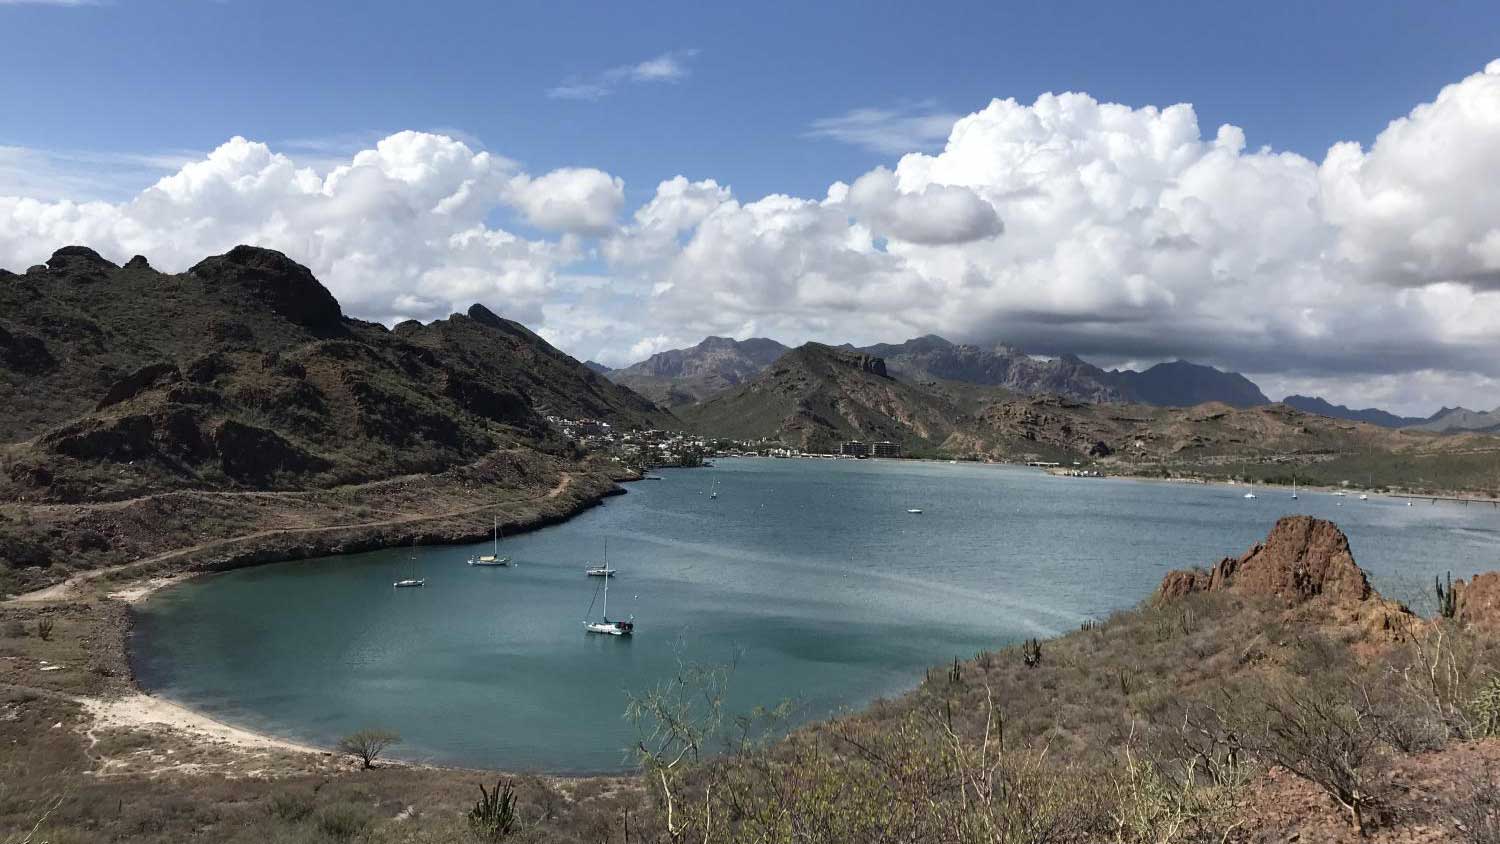 Beaches in San Carlos and Guaymas, Sonora, are set to reopen to locals and tourists by July 25, 2020.